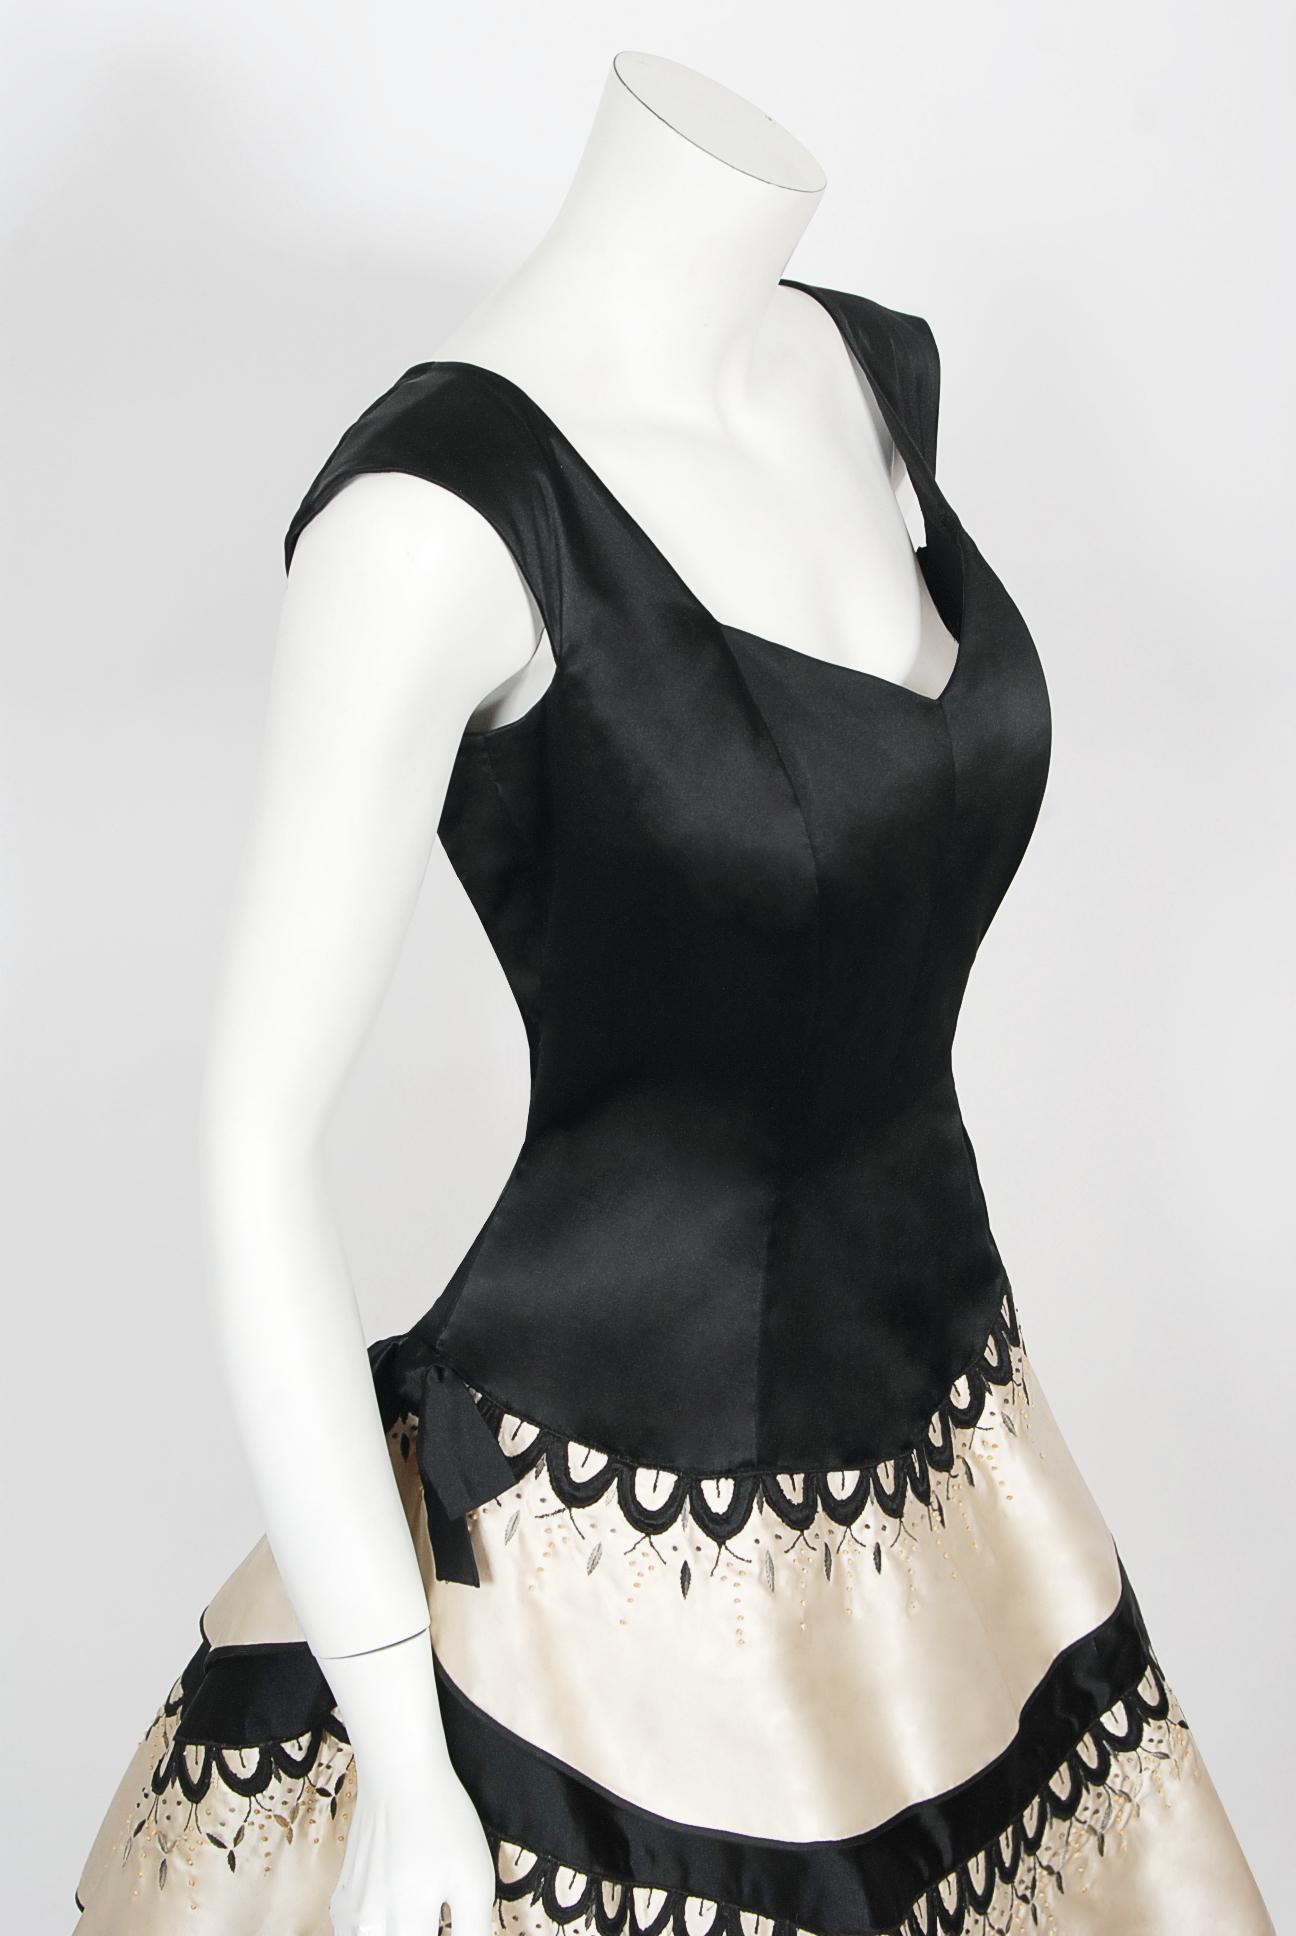 Vintage 1950's Emilio Schuberth Couture Black & Ivory Embroidered Satin Dress For Sale 2